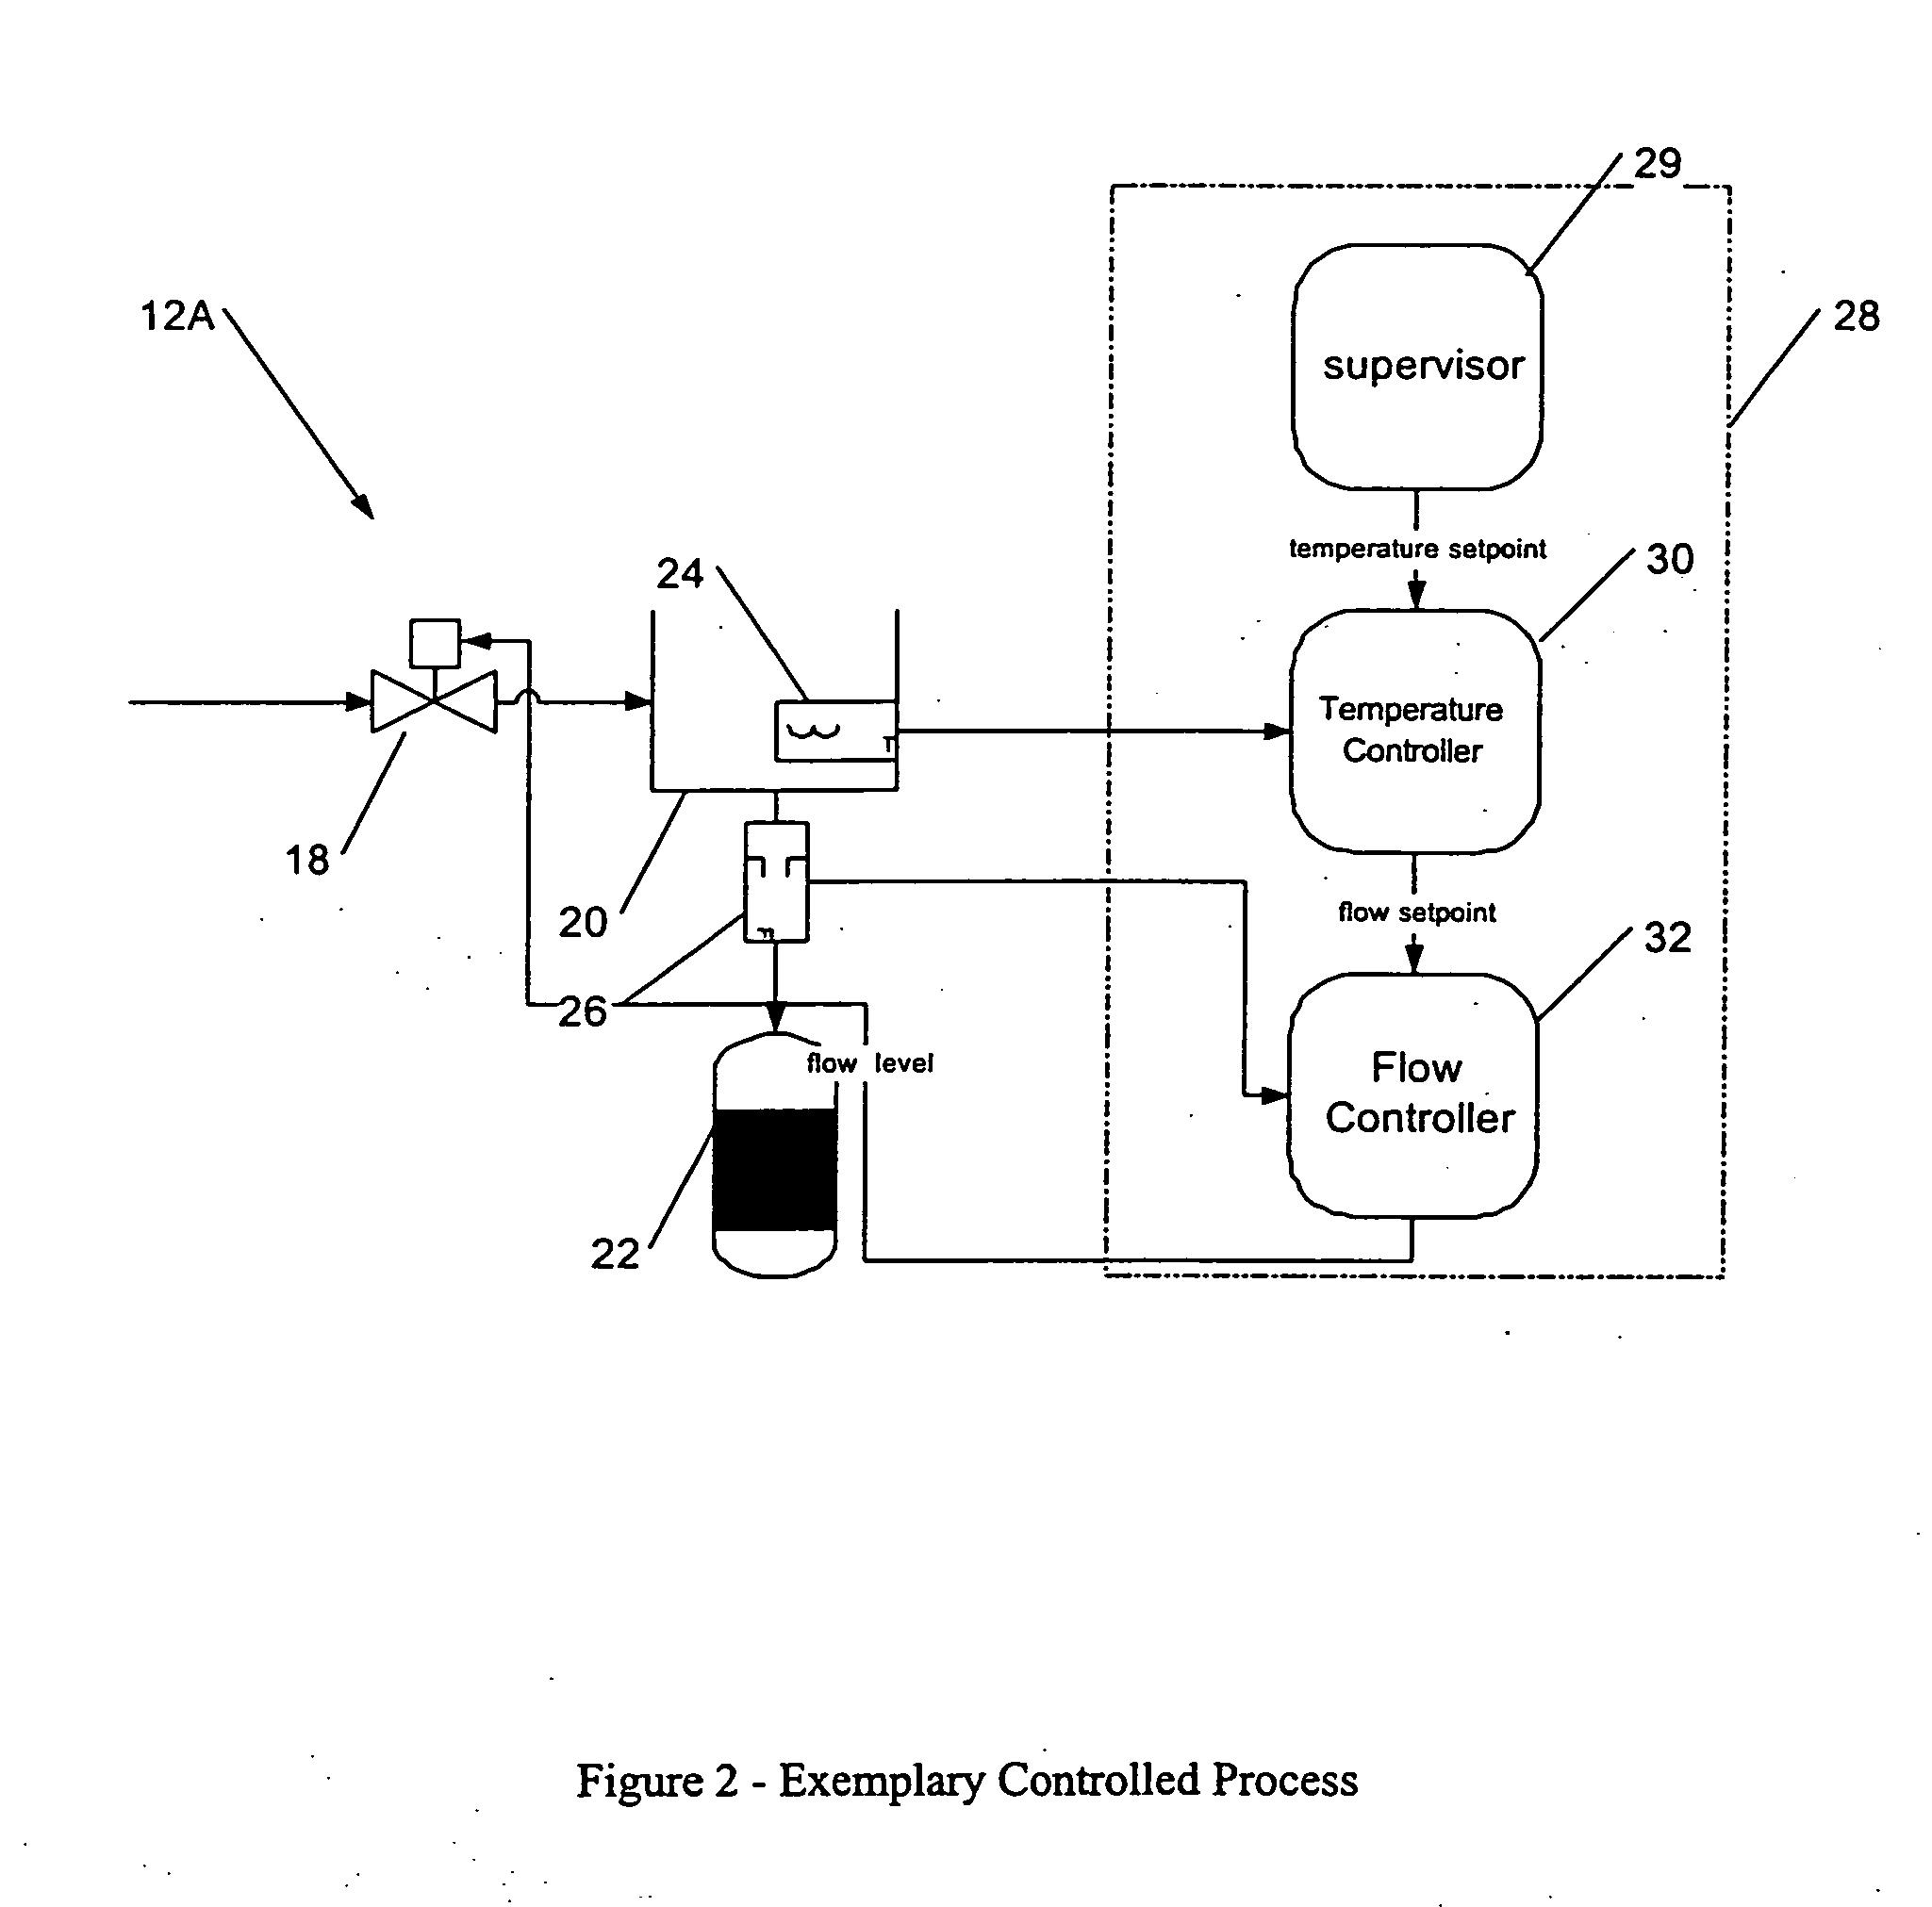 Process control configuration system with connection validation and configuration